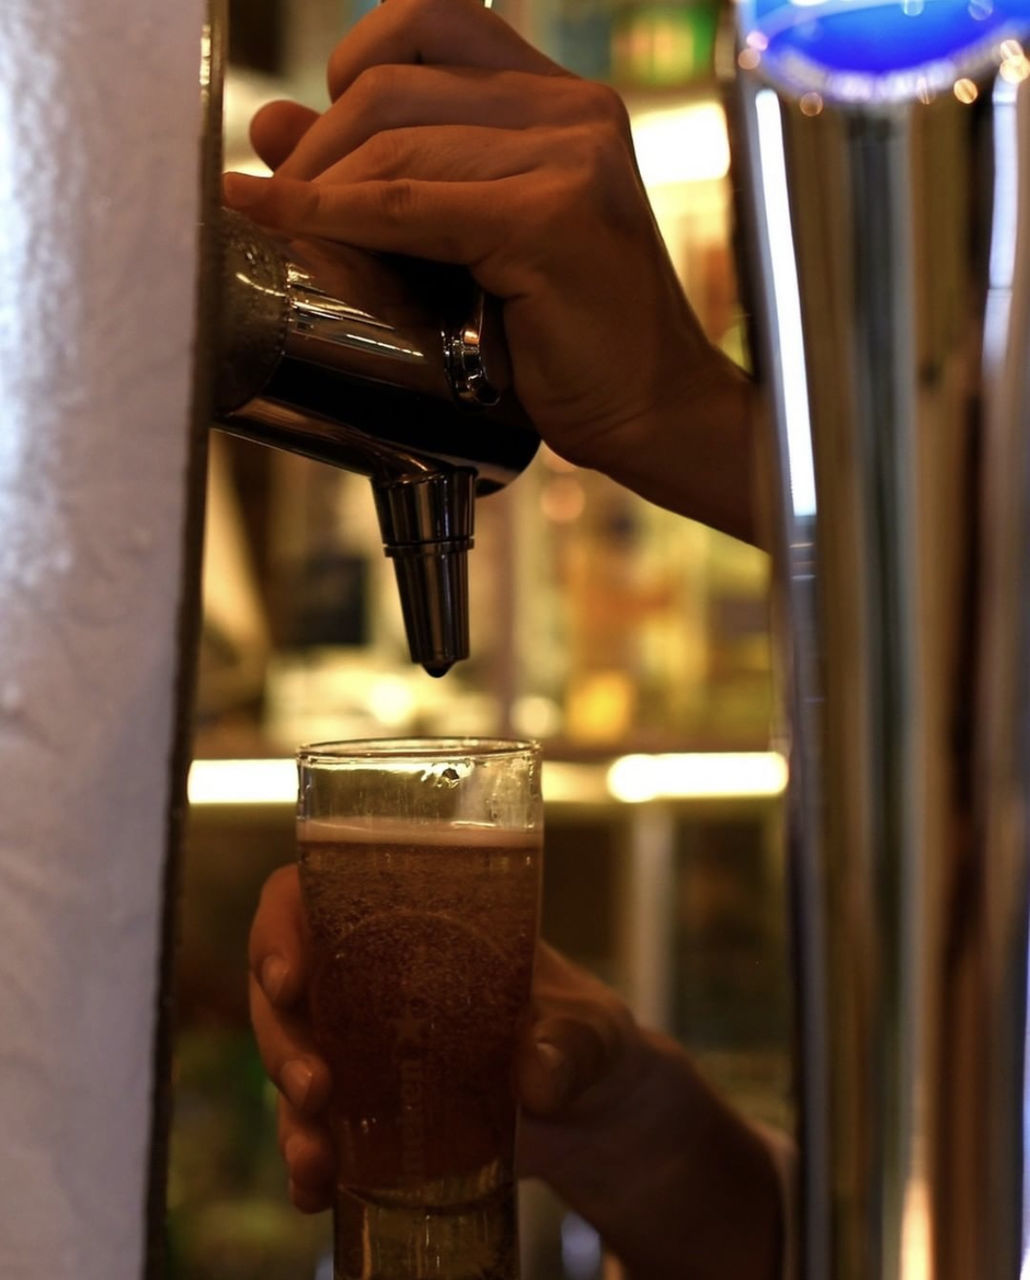 hand, drink, food and drink, refreshment, one person, alcoholic beverage, holding, adult, coffee, indoors, pouring, beer, close-up, business, alcohol, espresso machine, occupation, coffeemaker, working, beer tap, machinery, cafe, bar, making, barista, distilled beverage, focus on foreground